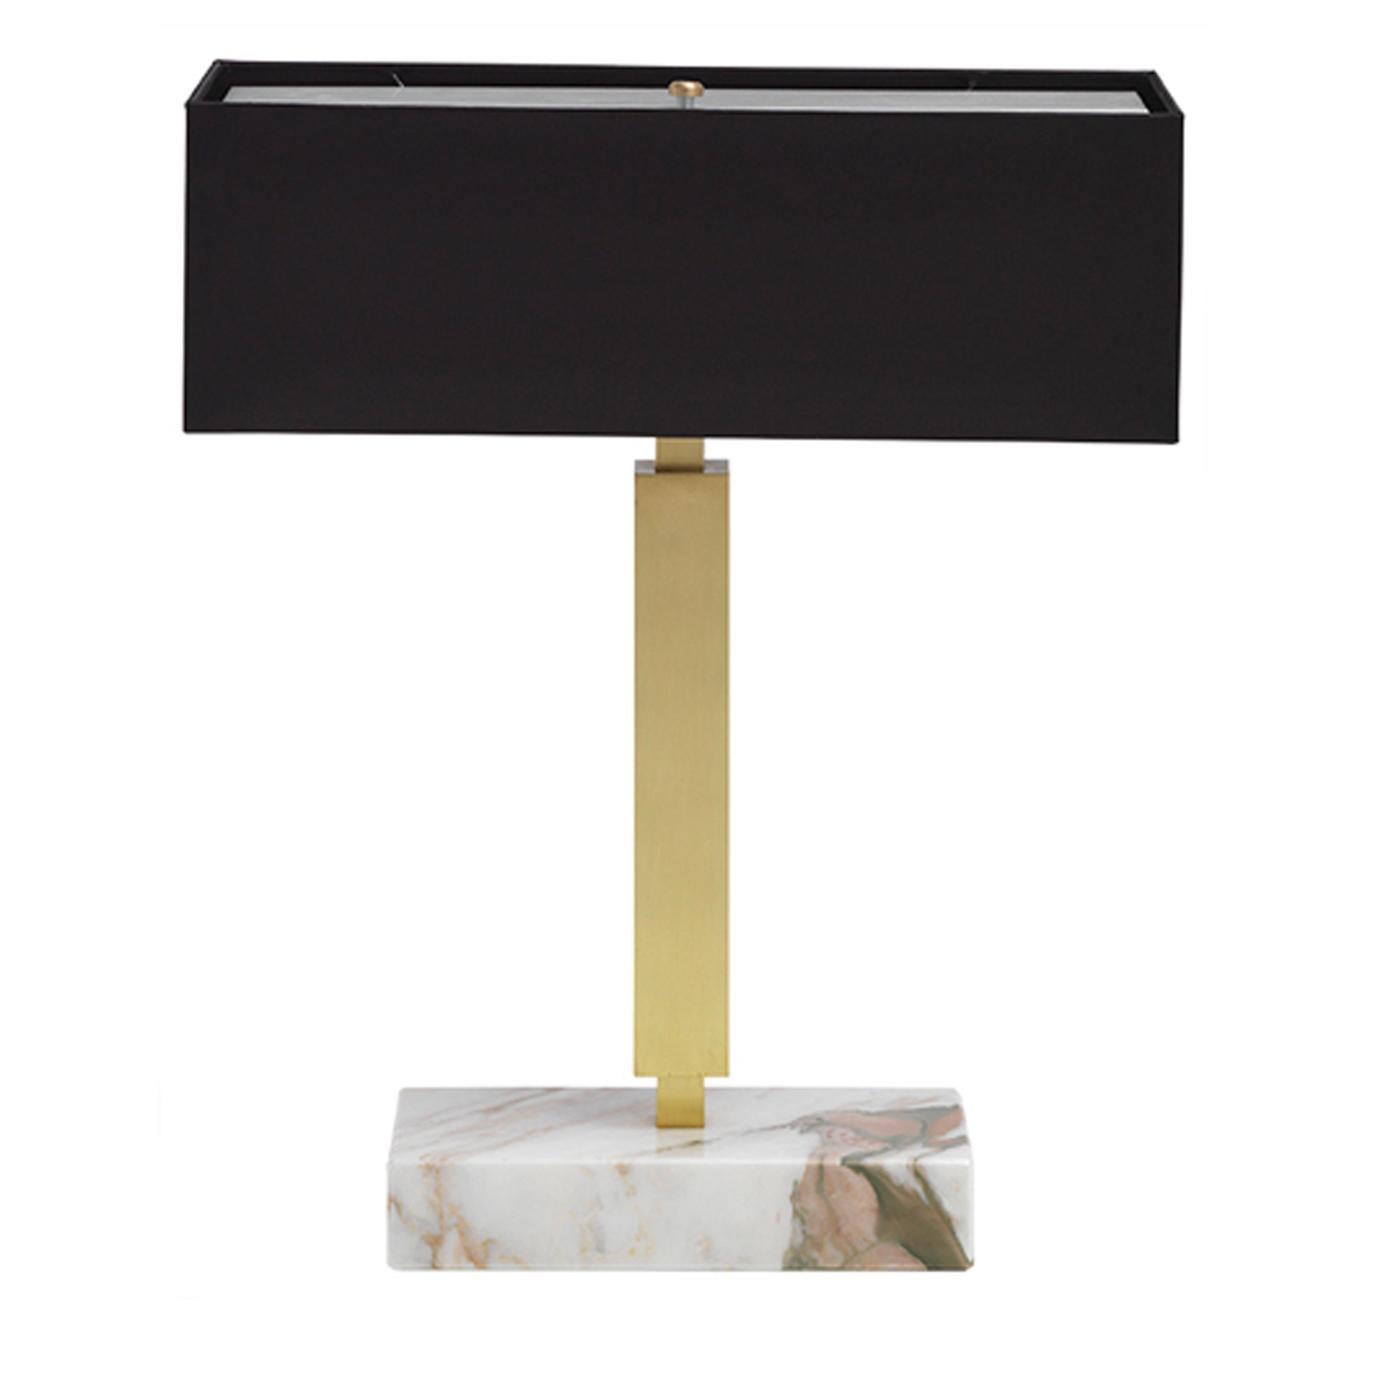 Exuding pure luxury, the Ettore rectangular table lamp sets the tone in a contemporary lounge space, either at home or in a hotel. On a Calcatta gold marble base, the lamp features a brass stem with a satin finish and a black rectangular shade for a